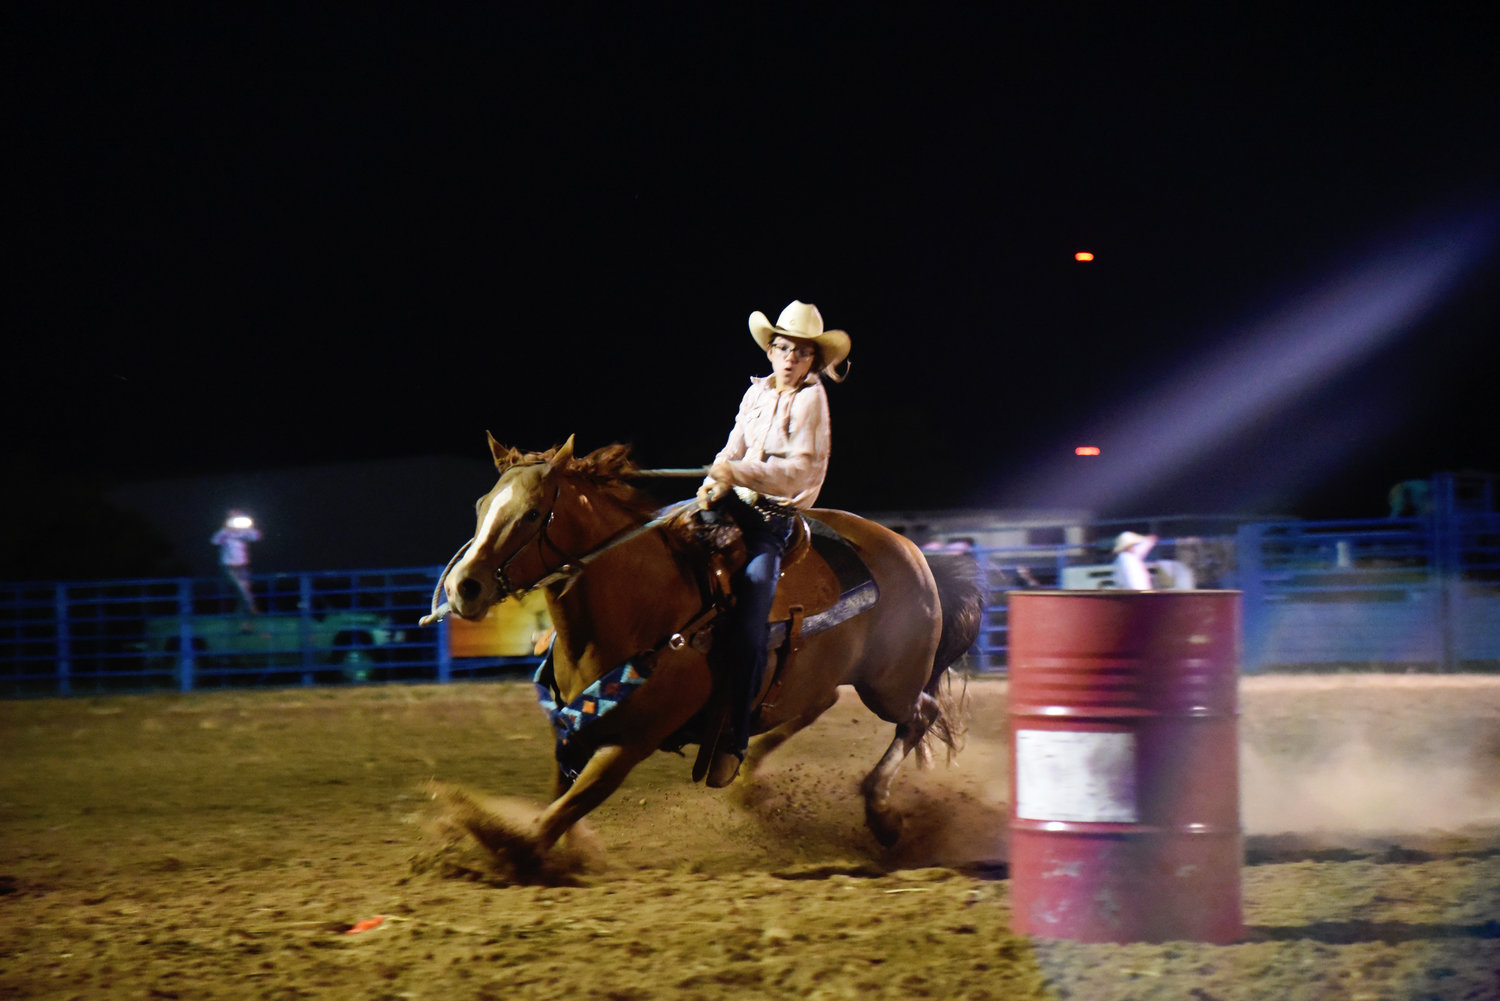 Kirby Akin entered the barrel race contest at the Operation C.A.R.E. rodeo held Aug. 5 and Aug. 6, 2022.